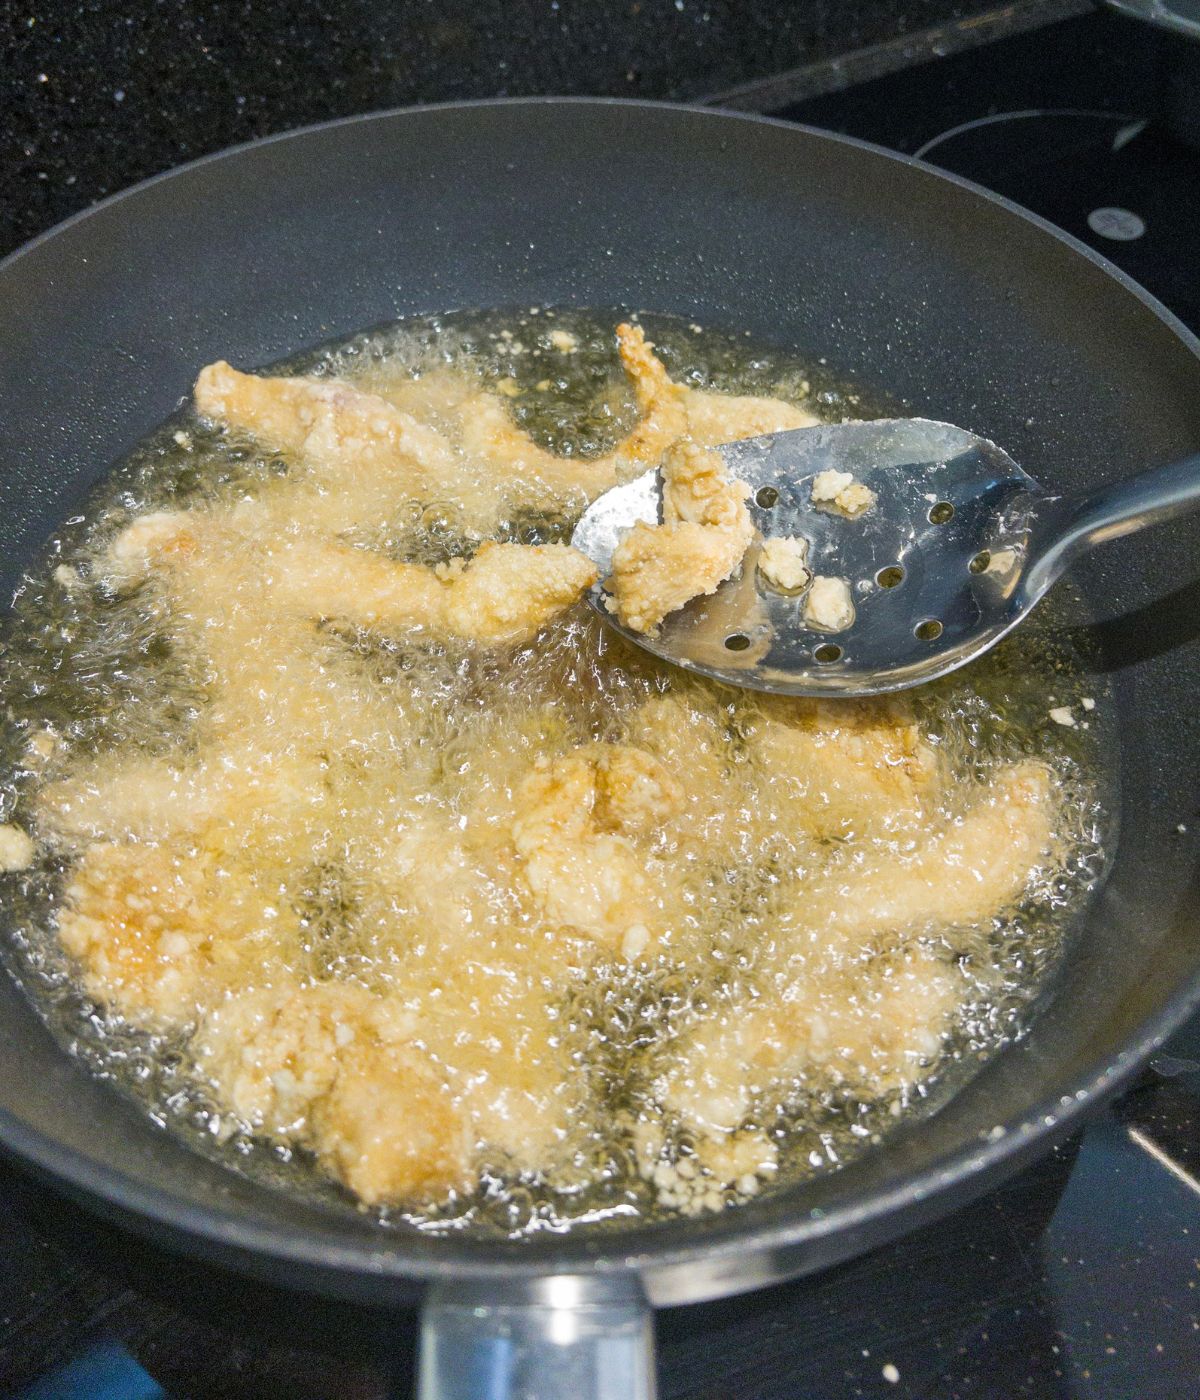 Chicken coated in flour and egg frying in the frying pan.